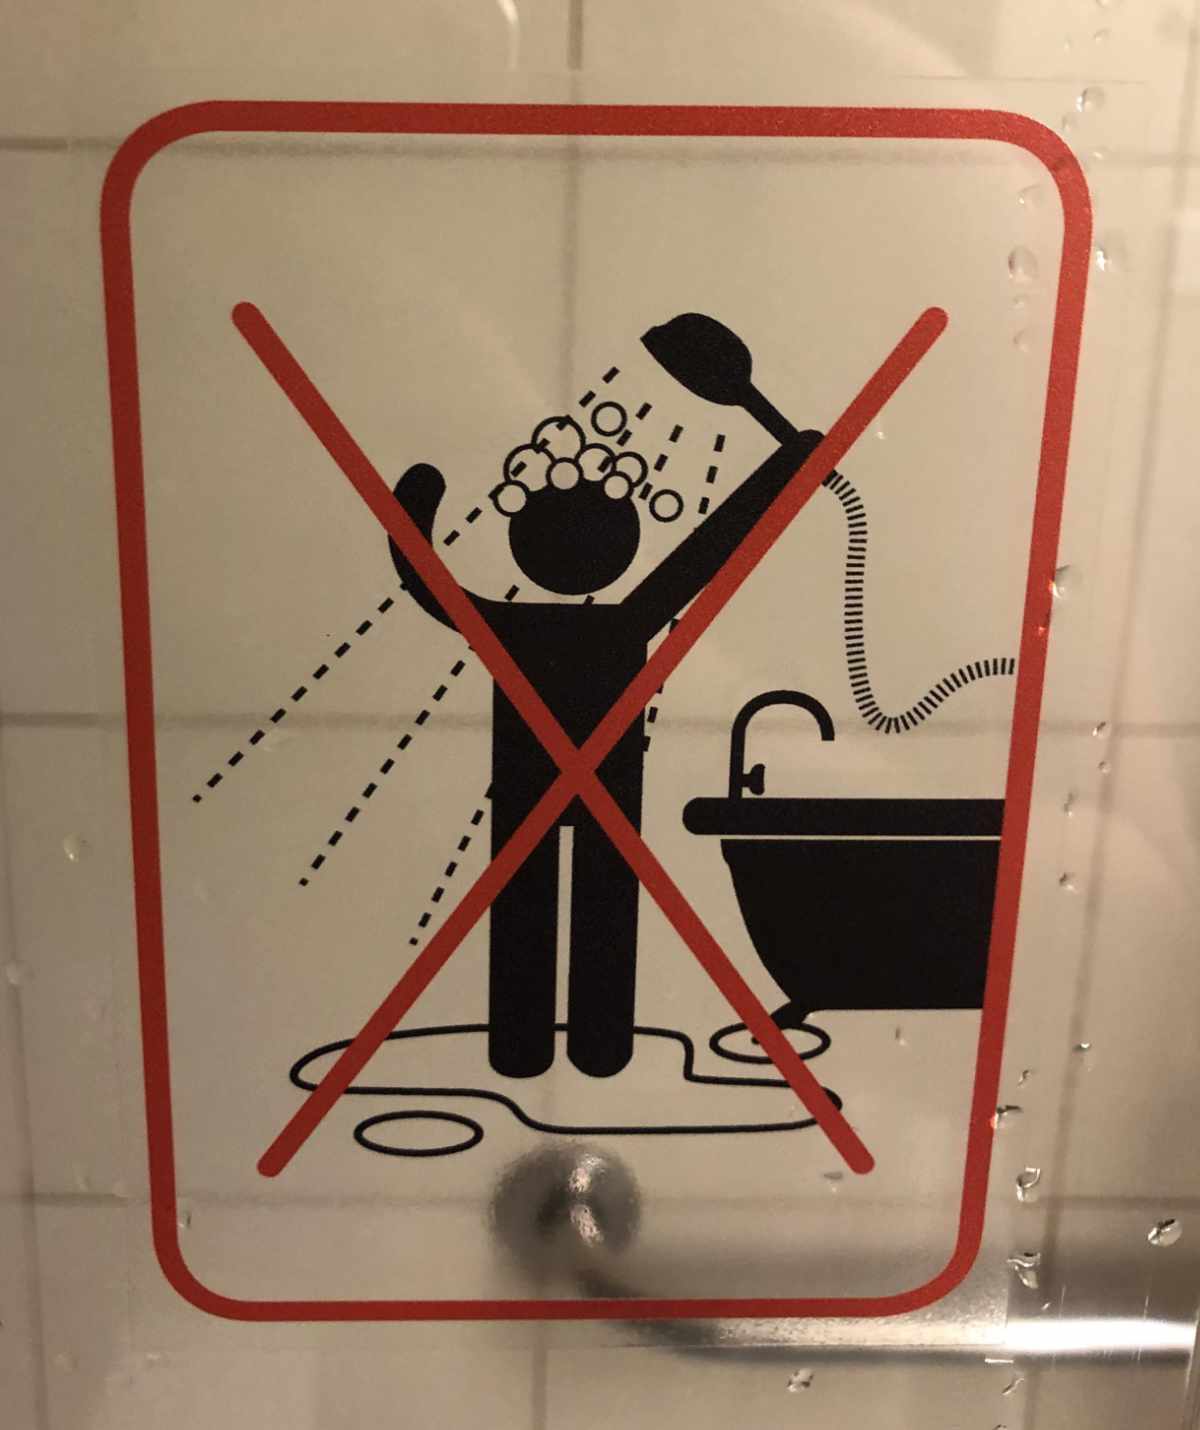 This sign at the shower in a hotel in Prague